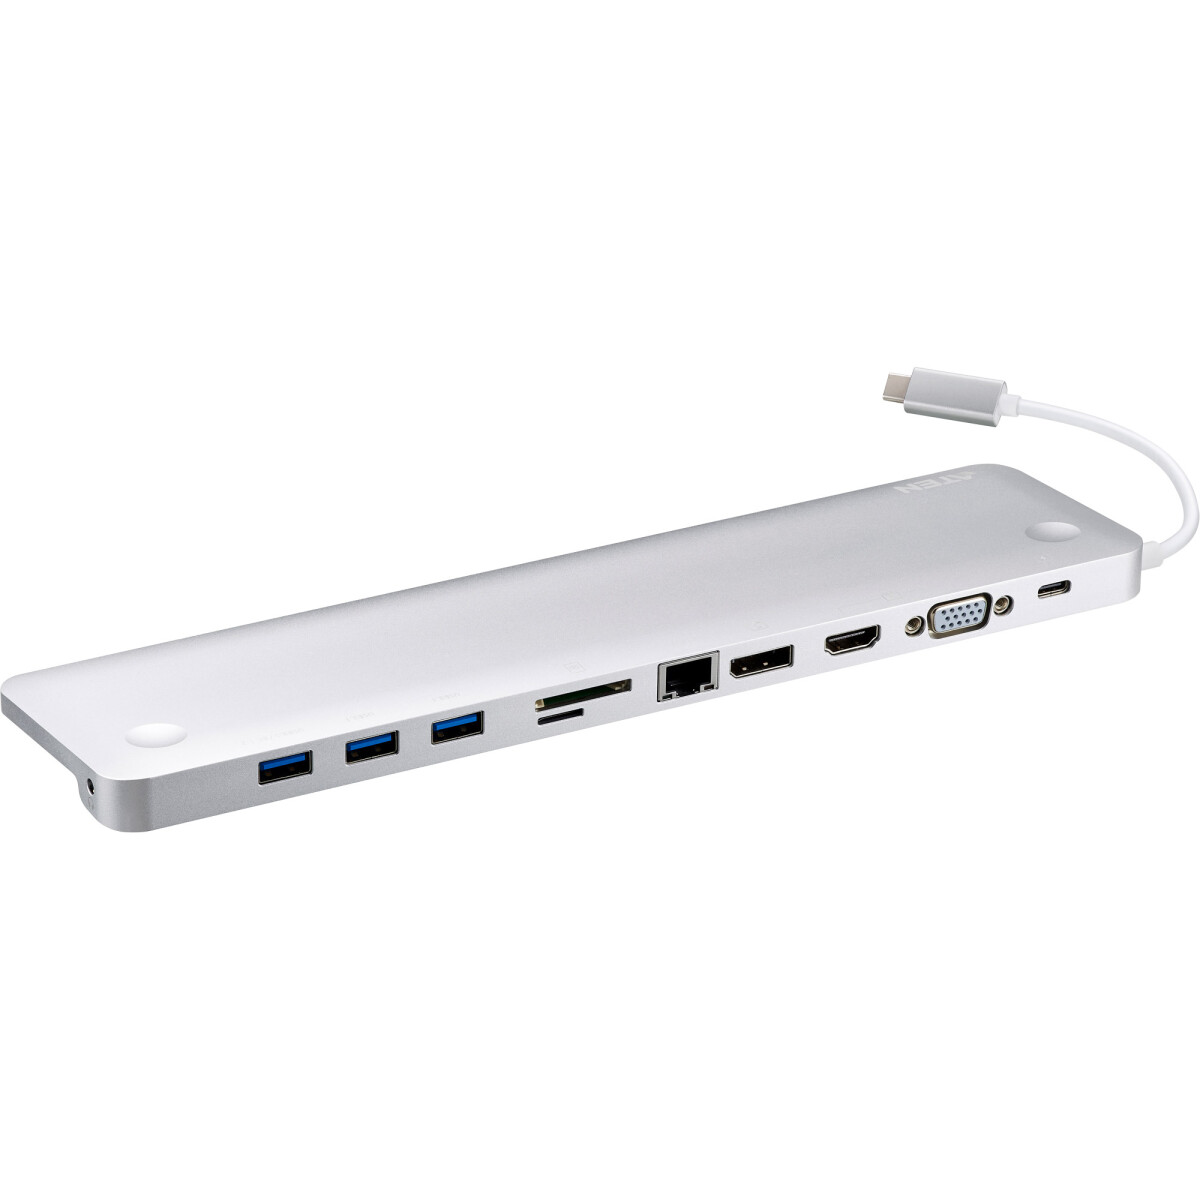 ATEN UH3234 USB-C Multiport Dock with Power Delivery...